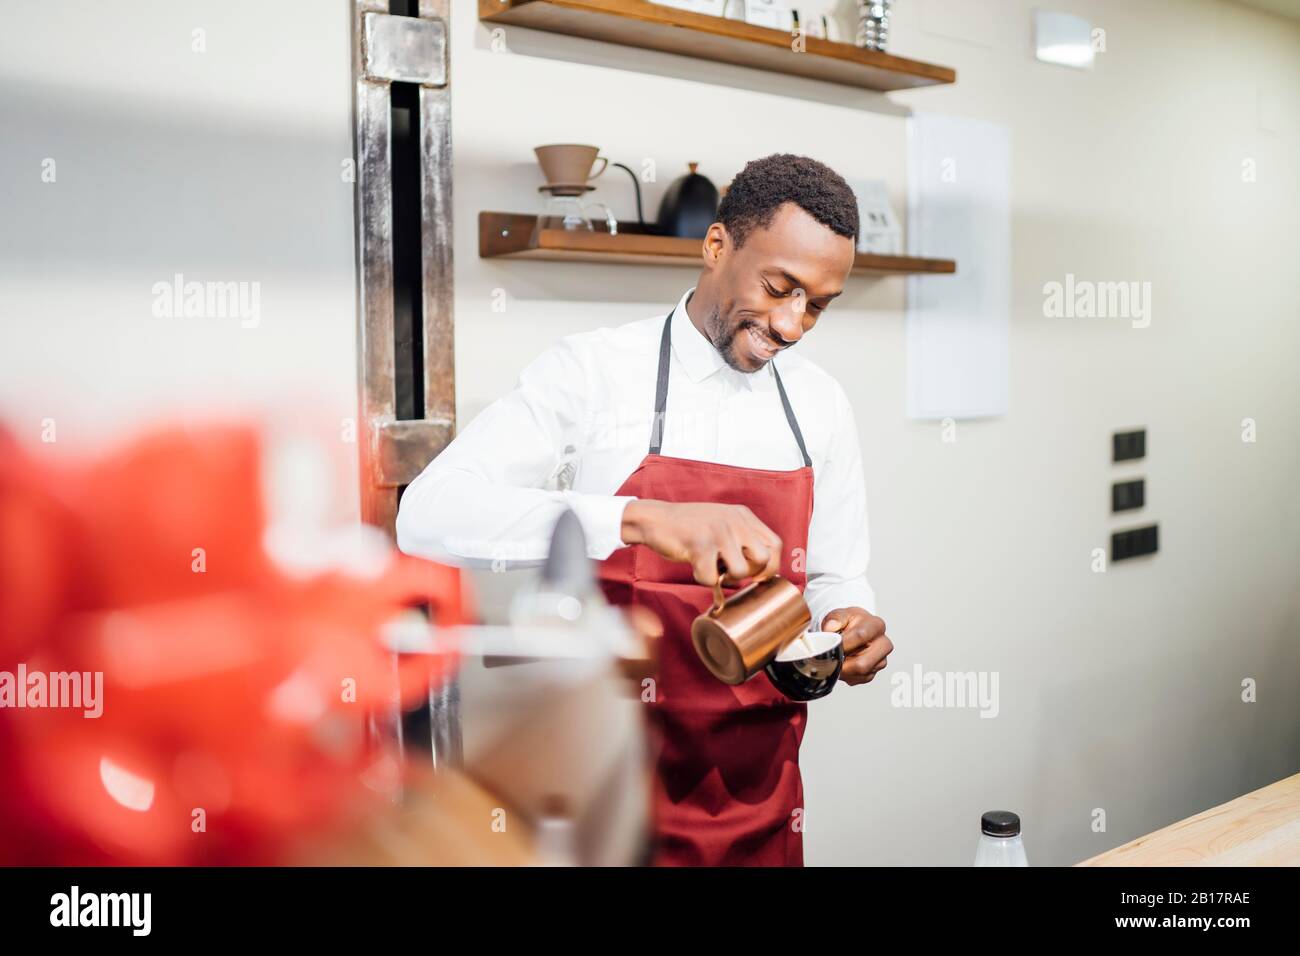 Smiling barista pouring milk froth into cup in a coffee shop Stock Photo